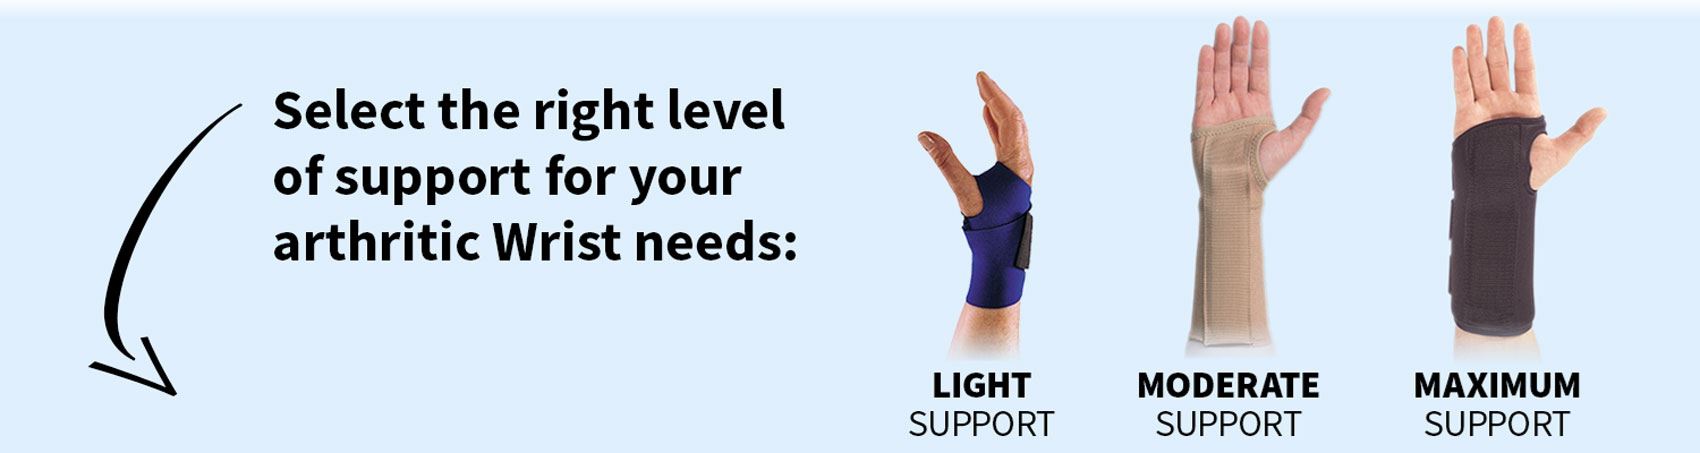 Select the right level of support for your arthritic wrist needs